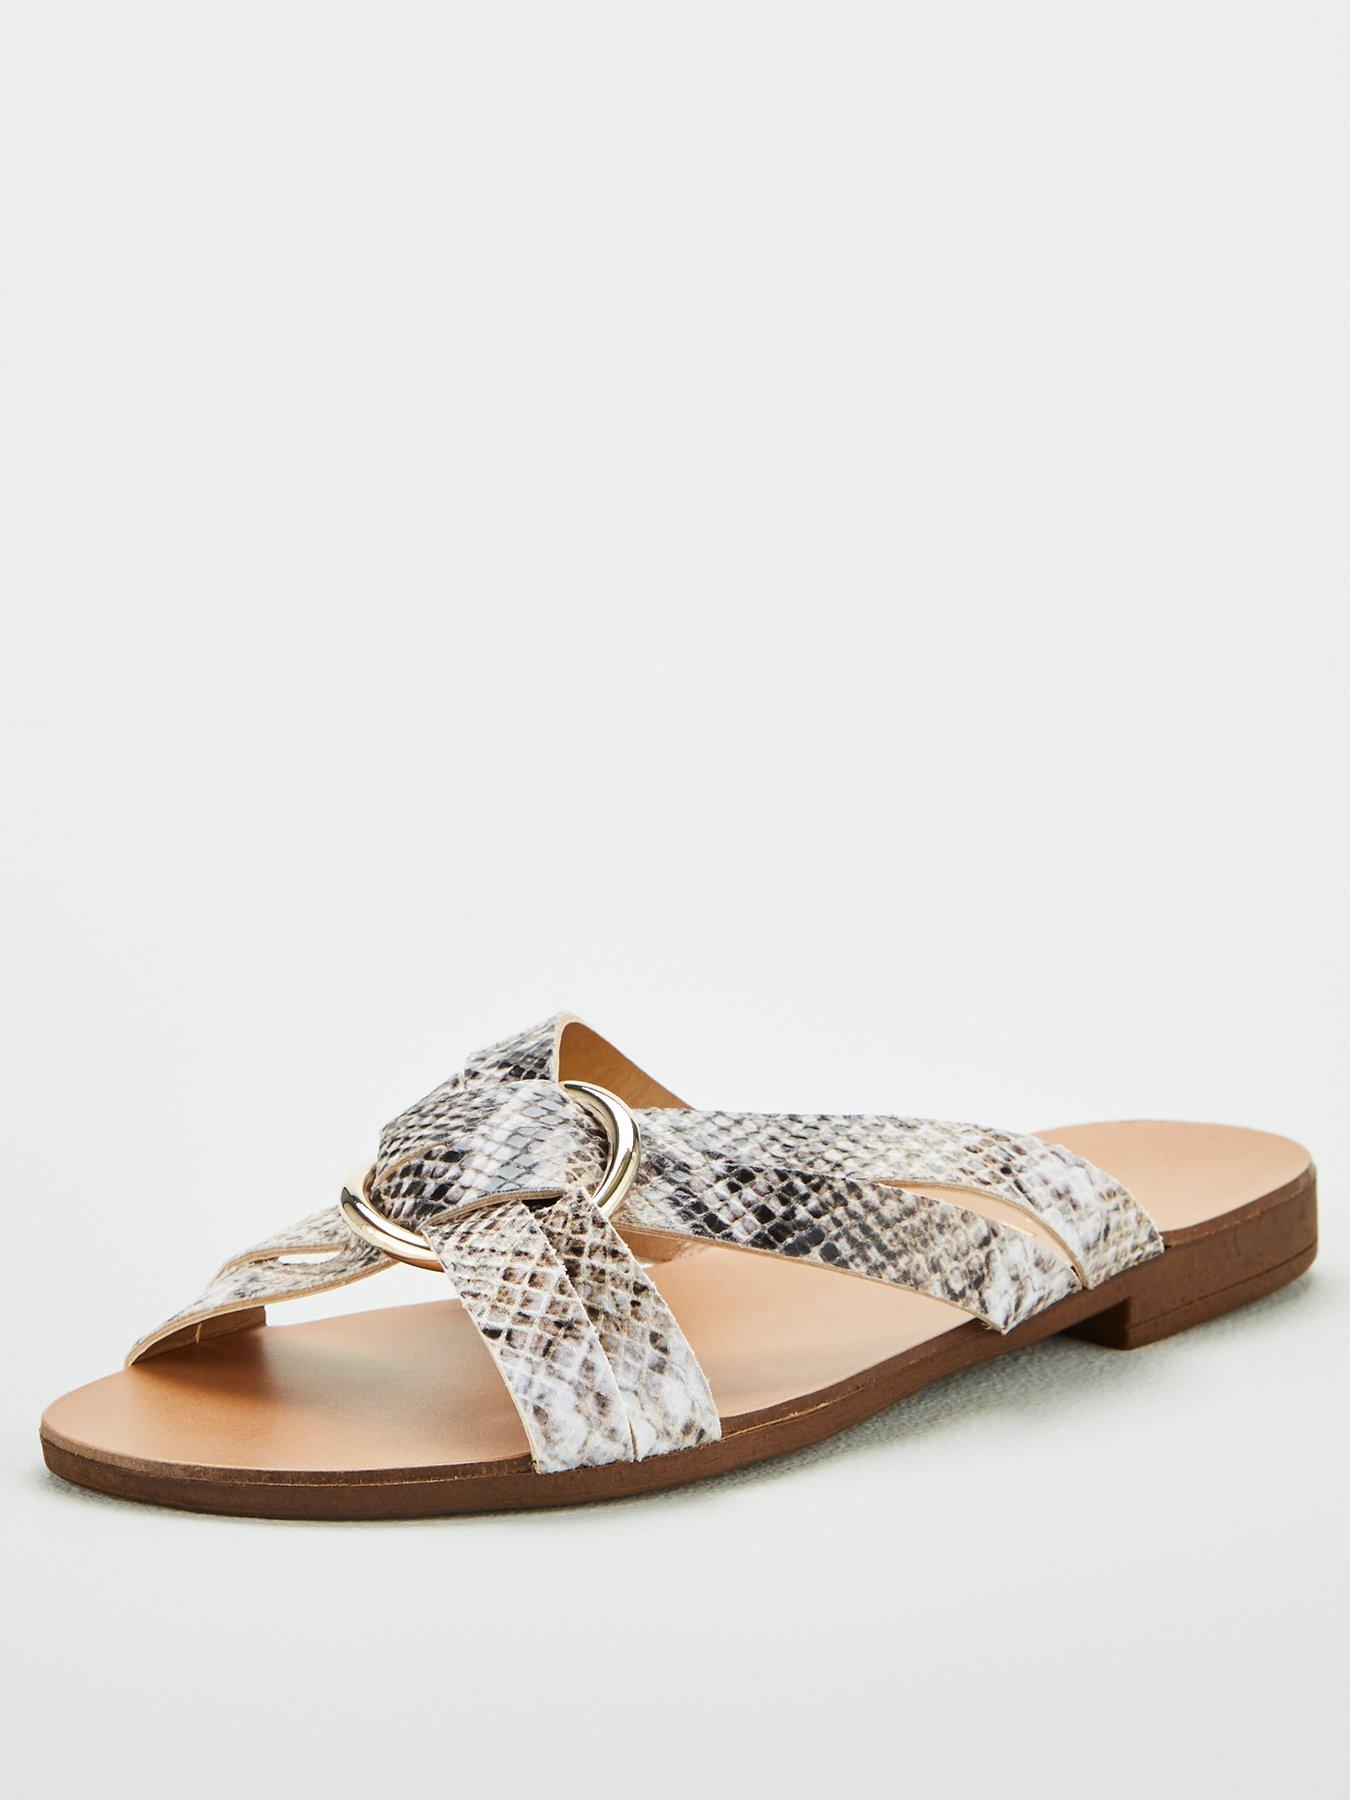 v-by-very-hareem-ring-leather-detail-crossover-flat-sandal